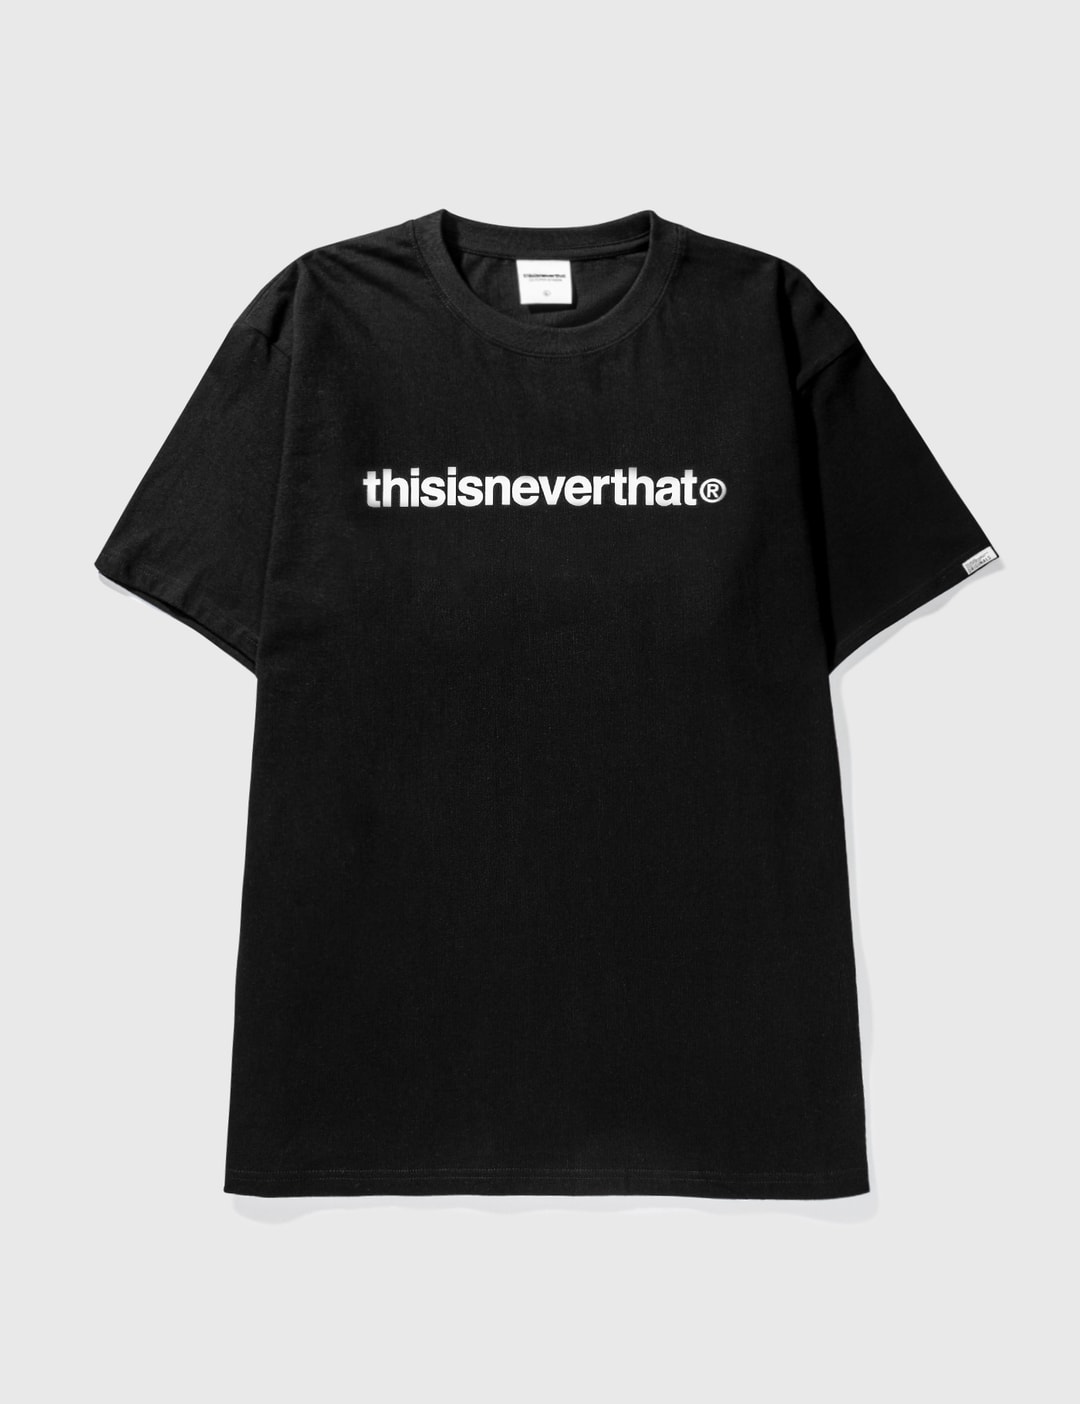 thisisneverthat® - T-logo T-shirt | HBX - Globally Curated Fashion and ...